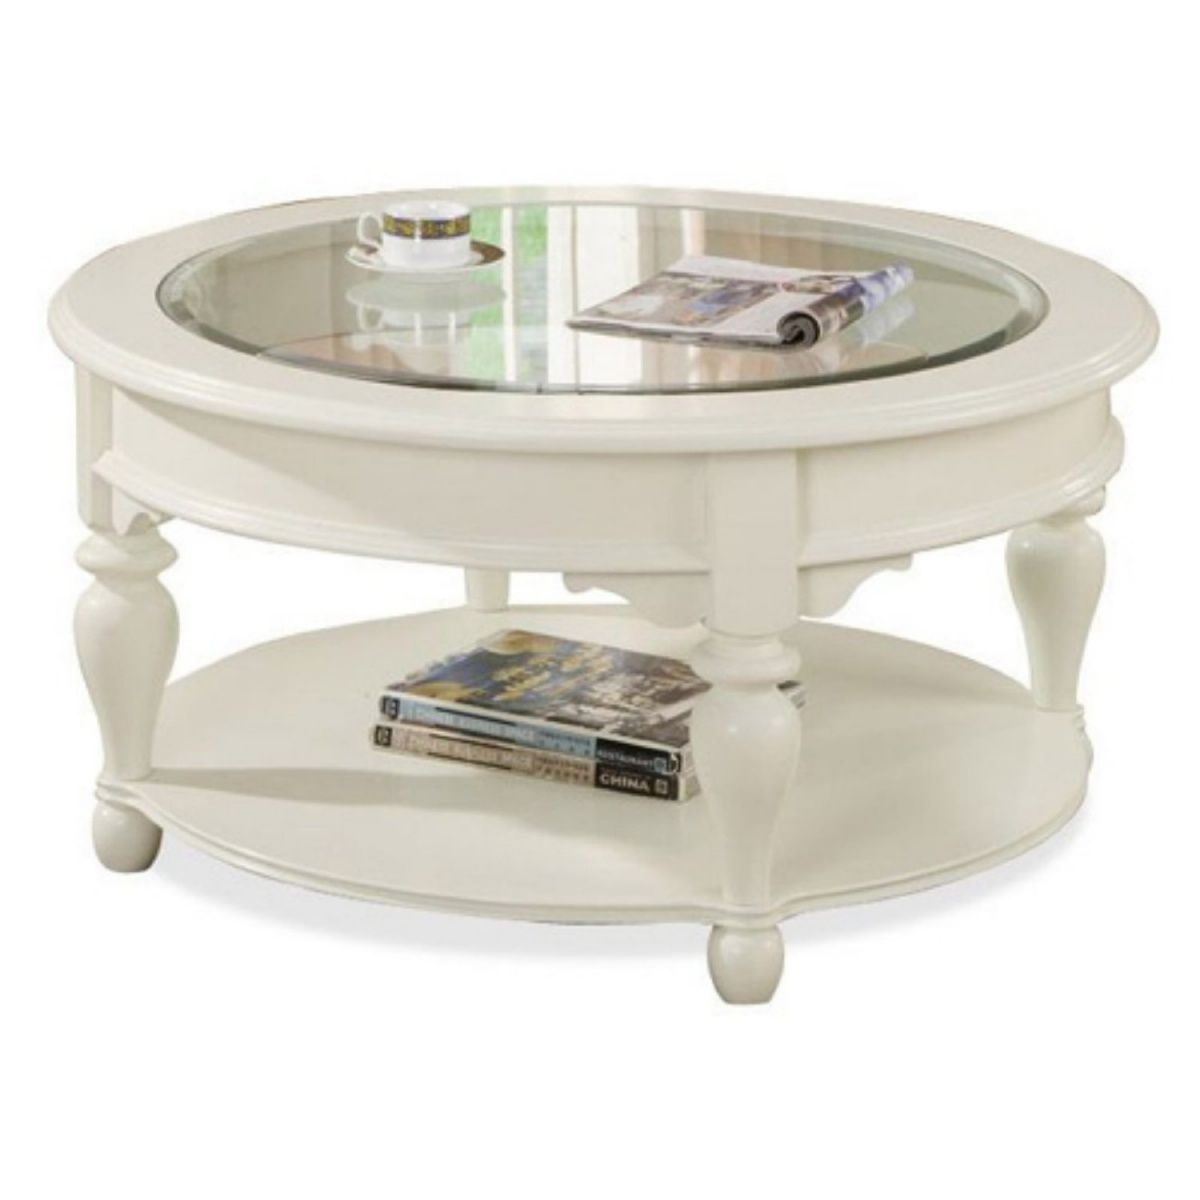 Essex point round coffee table by riverside furniture